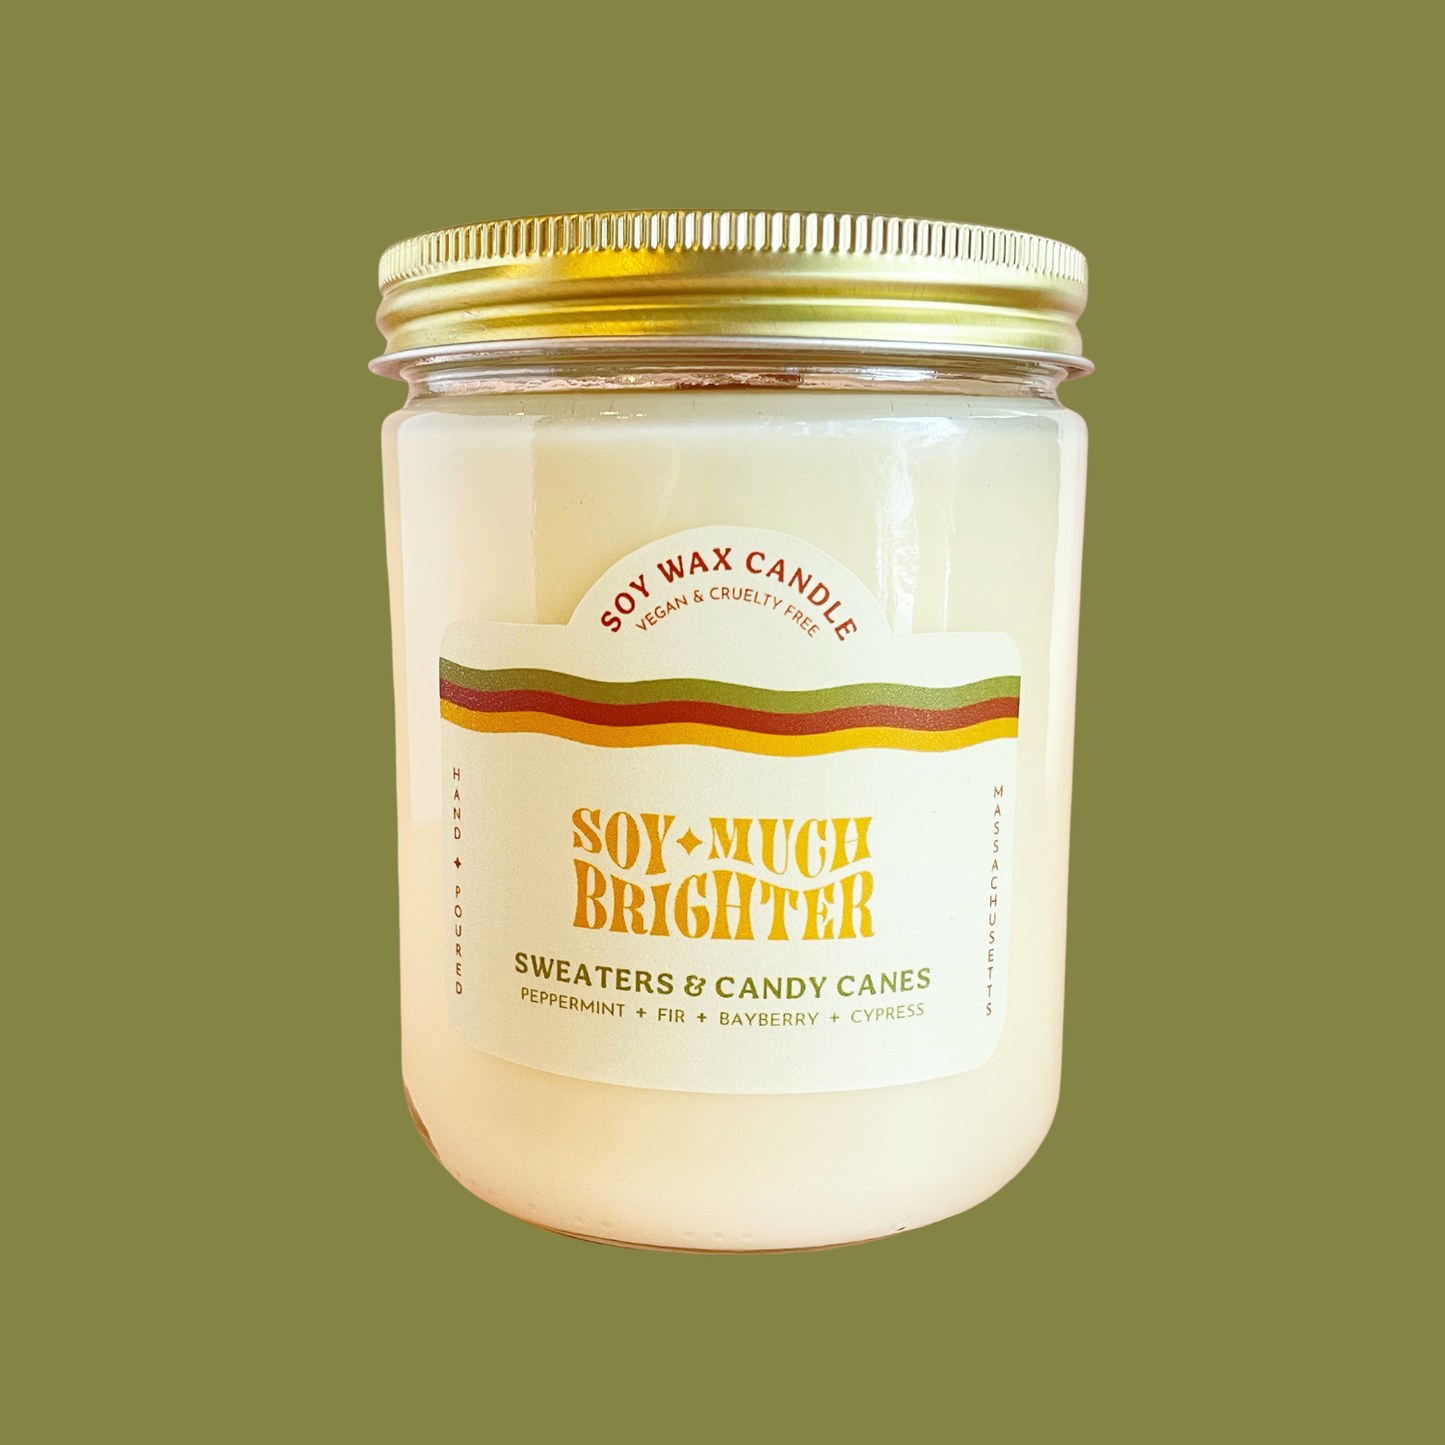 Load image into Gallery viewer, Shop Holiday Candles Online with the fir scented candle by Soy Much Brighter Boston, MA
